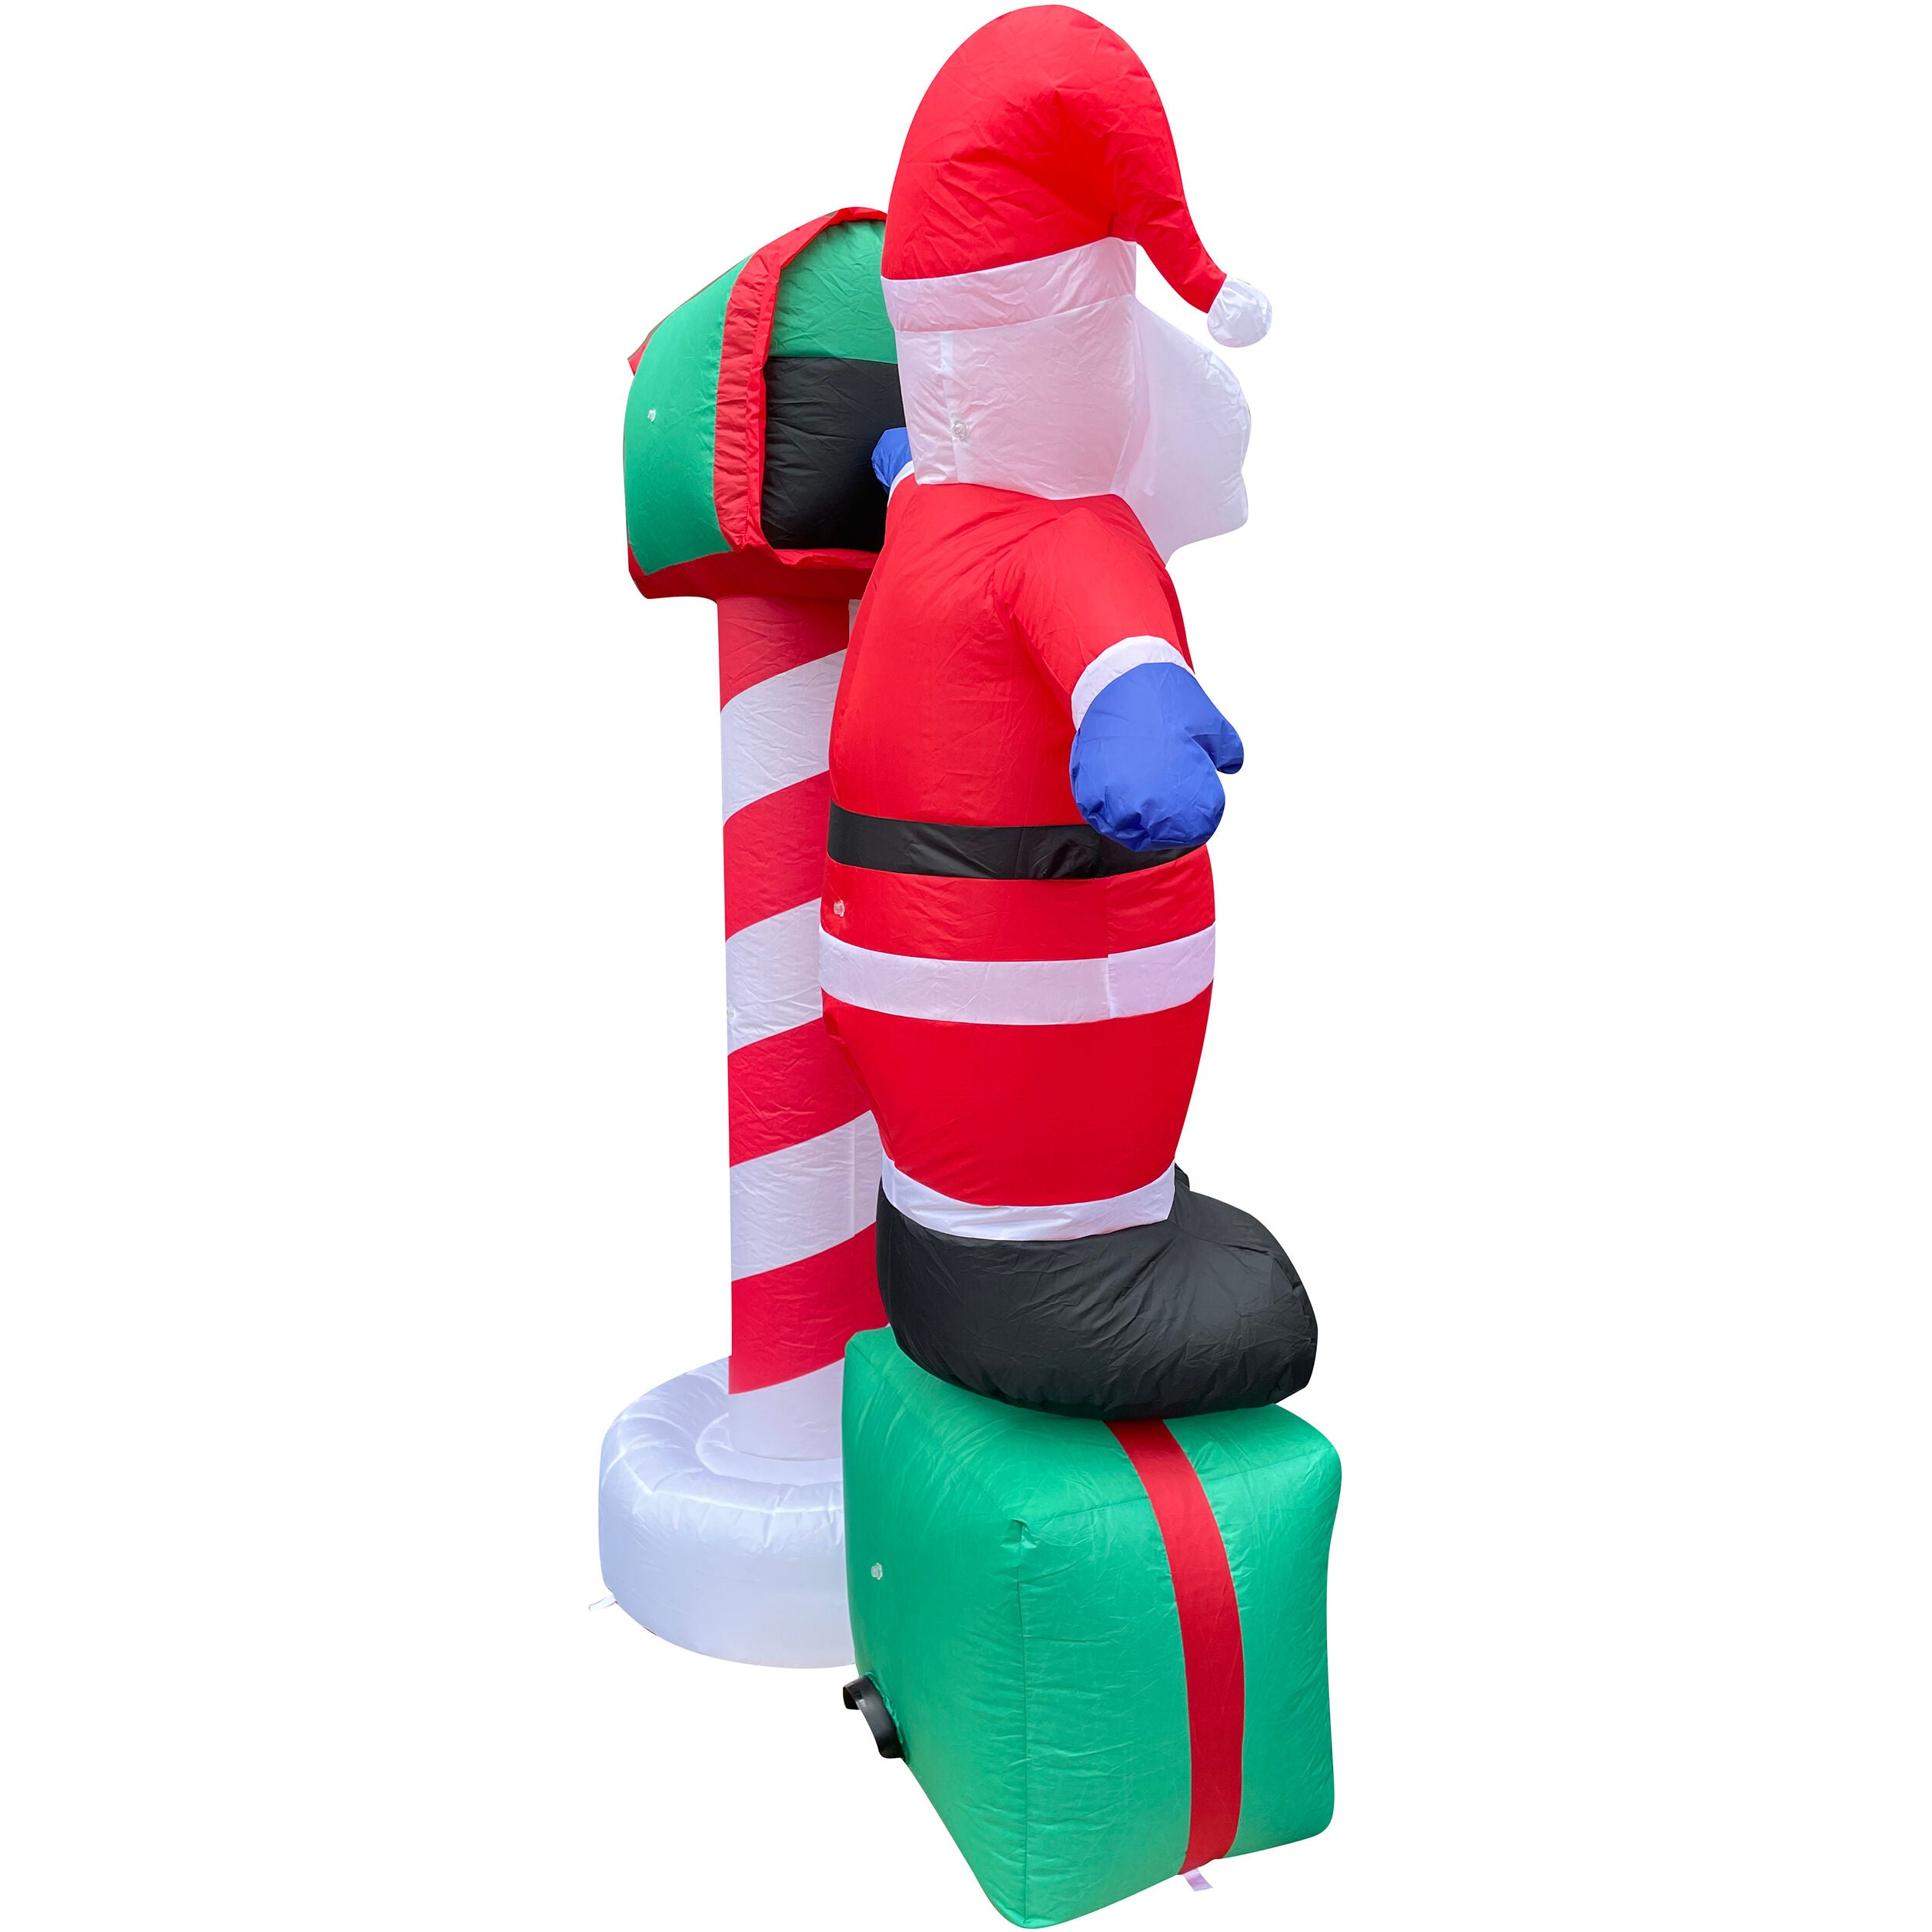 Fraser Hill Farm -  6-Ft. Tall Welcome Mailbox with Santa, Snowman, and Penguin, Outdoor Blow-Up Christmas Inflatable with Lights and Storage Bag